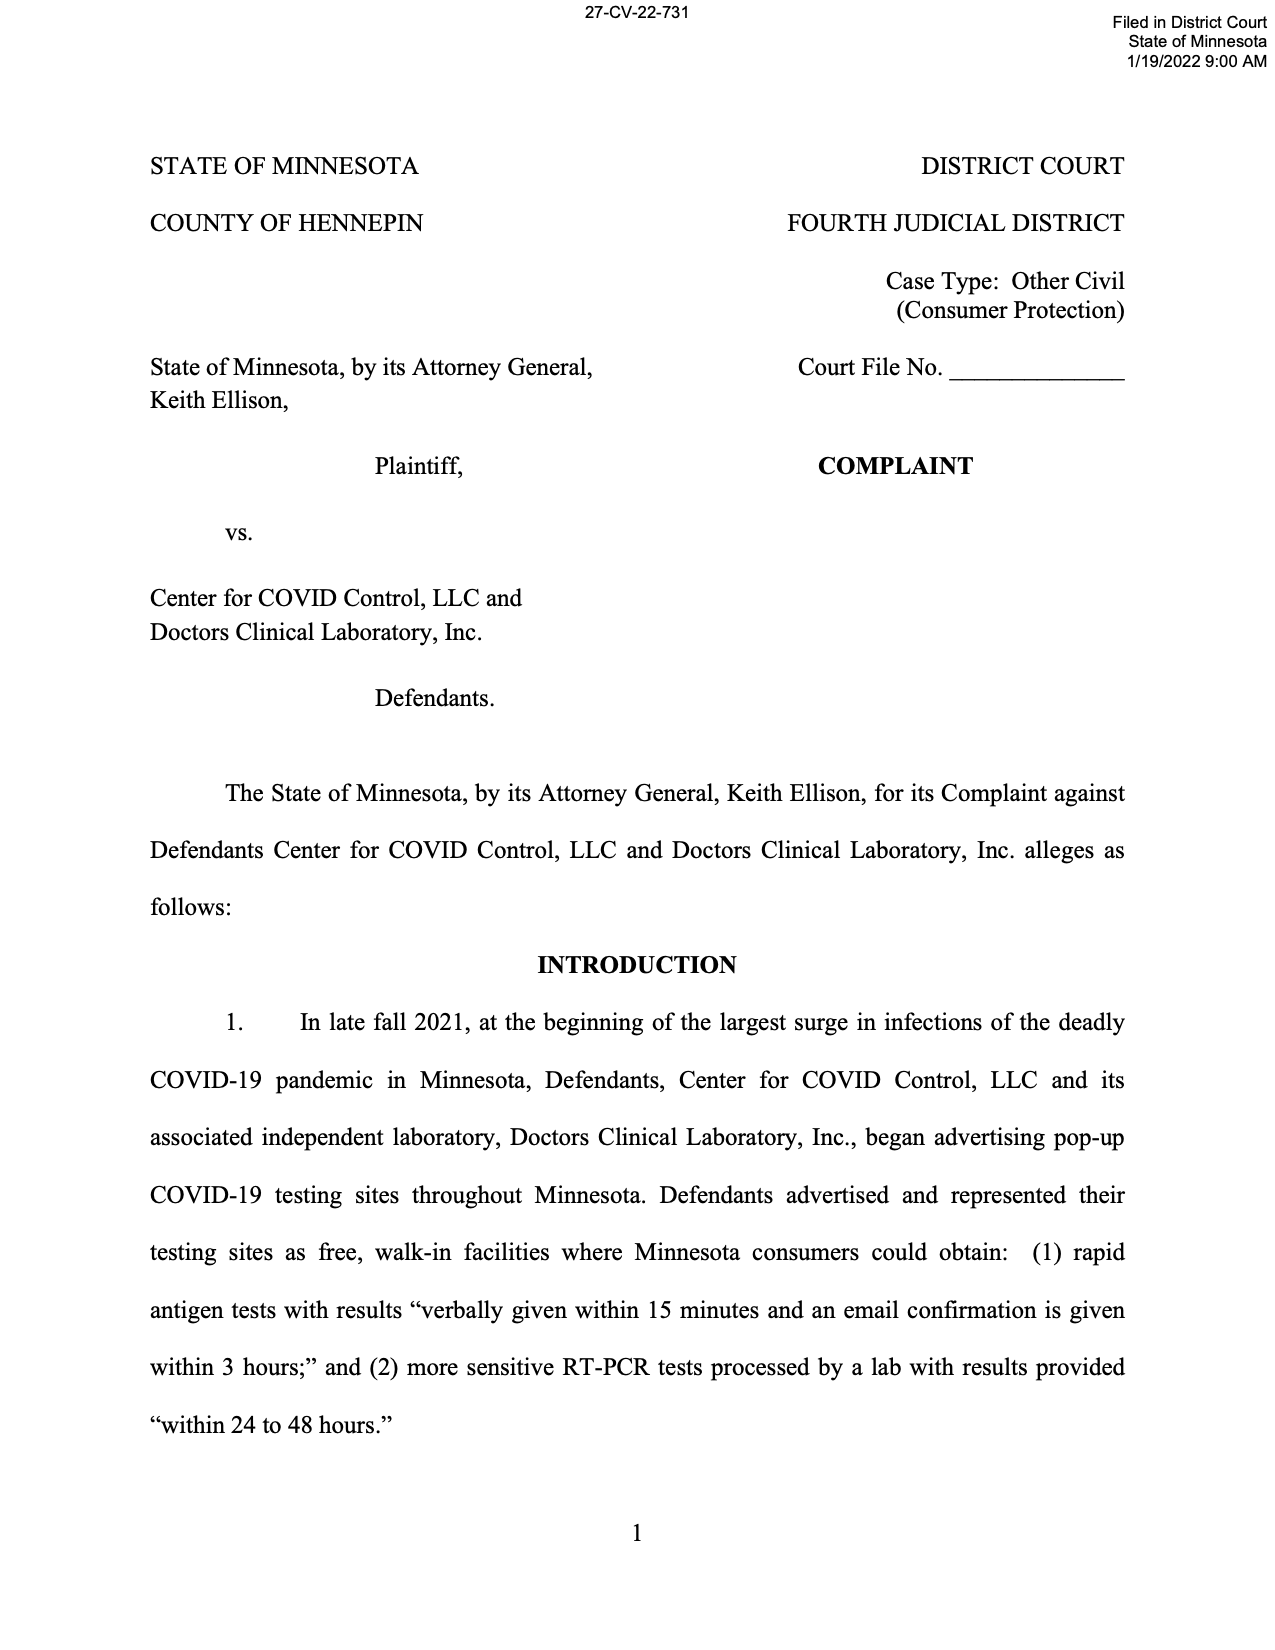 first page of a lawsuit